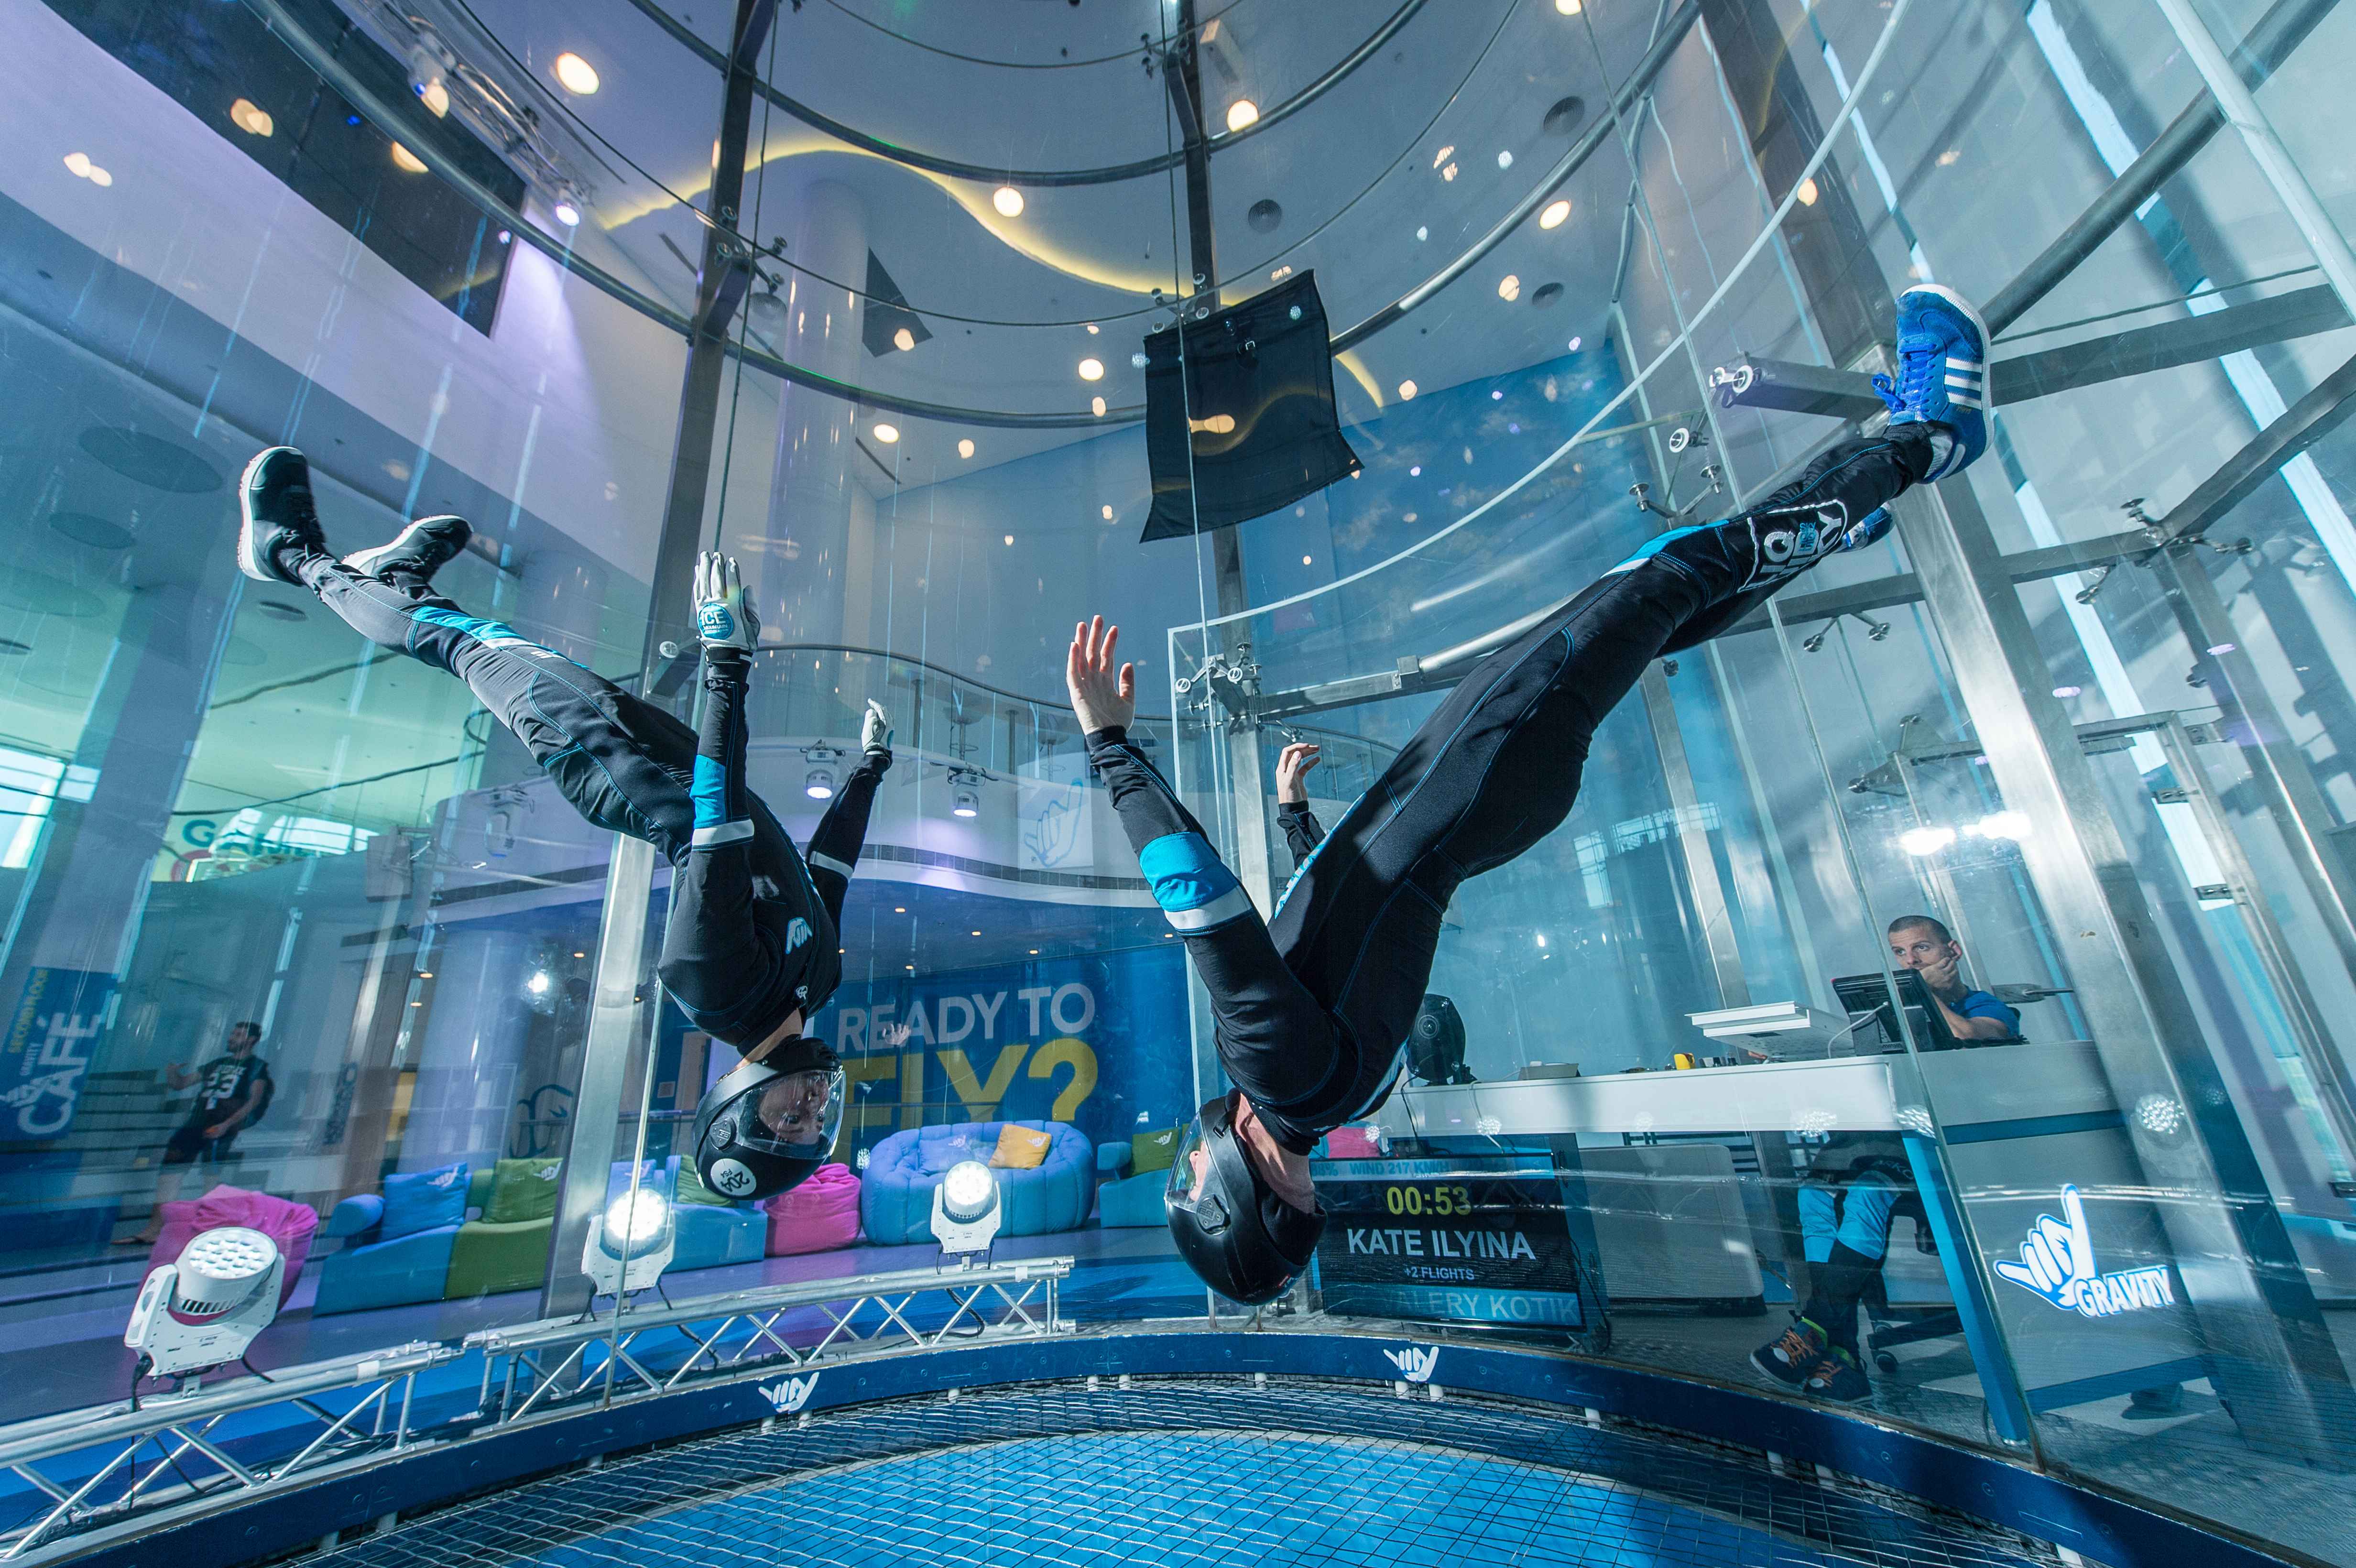 Reasons to try Indoor Skydiving Skydivemag